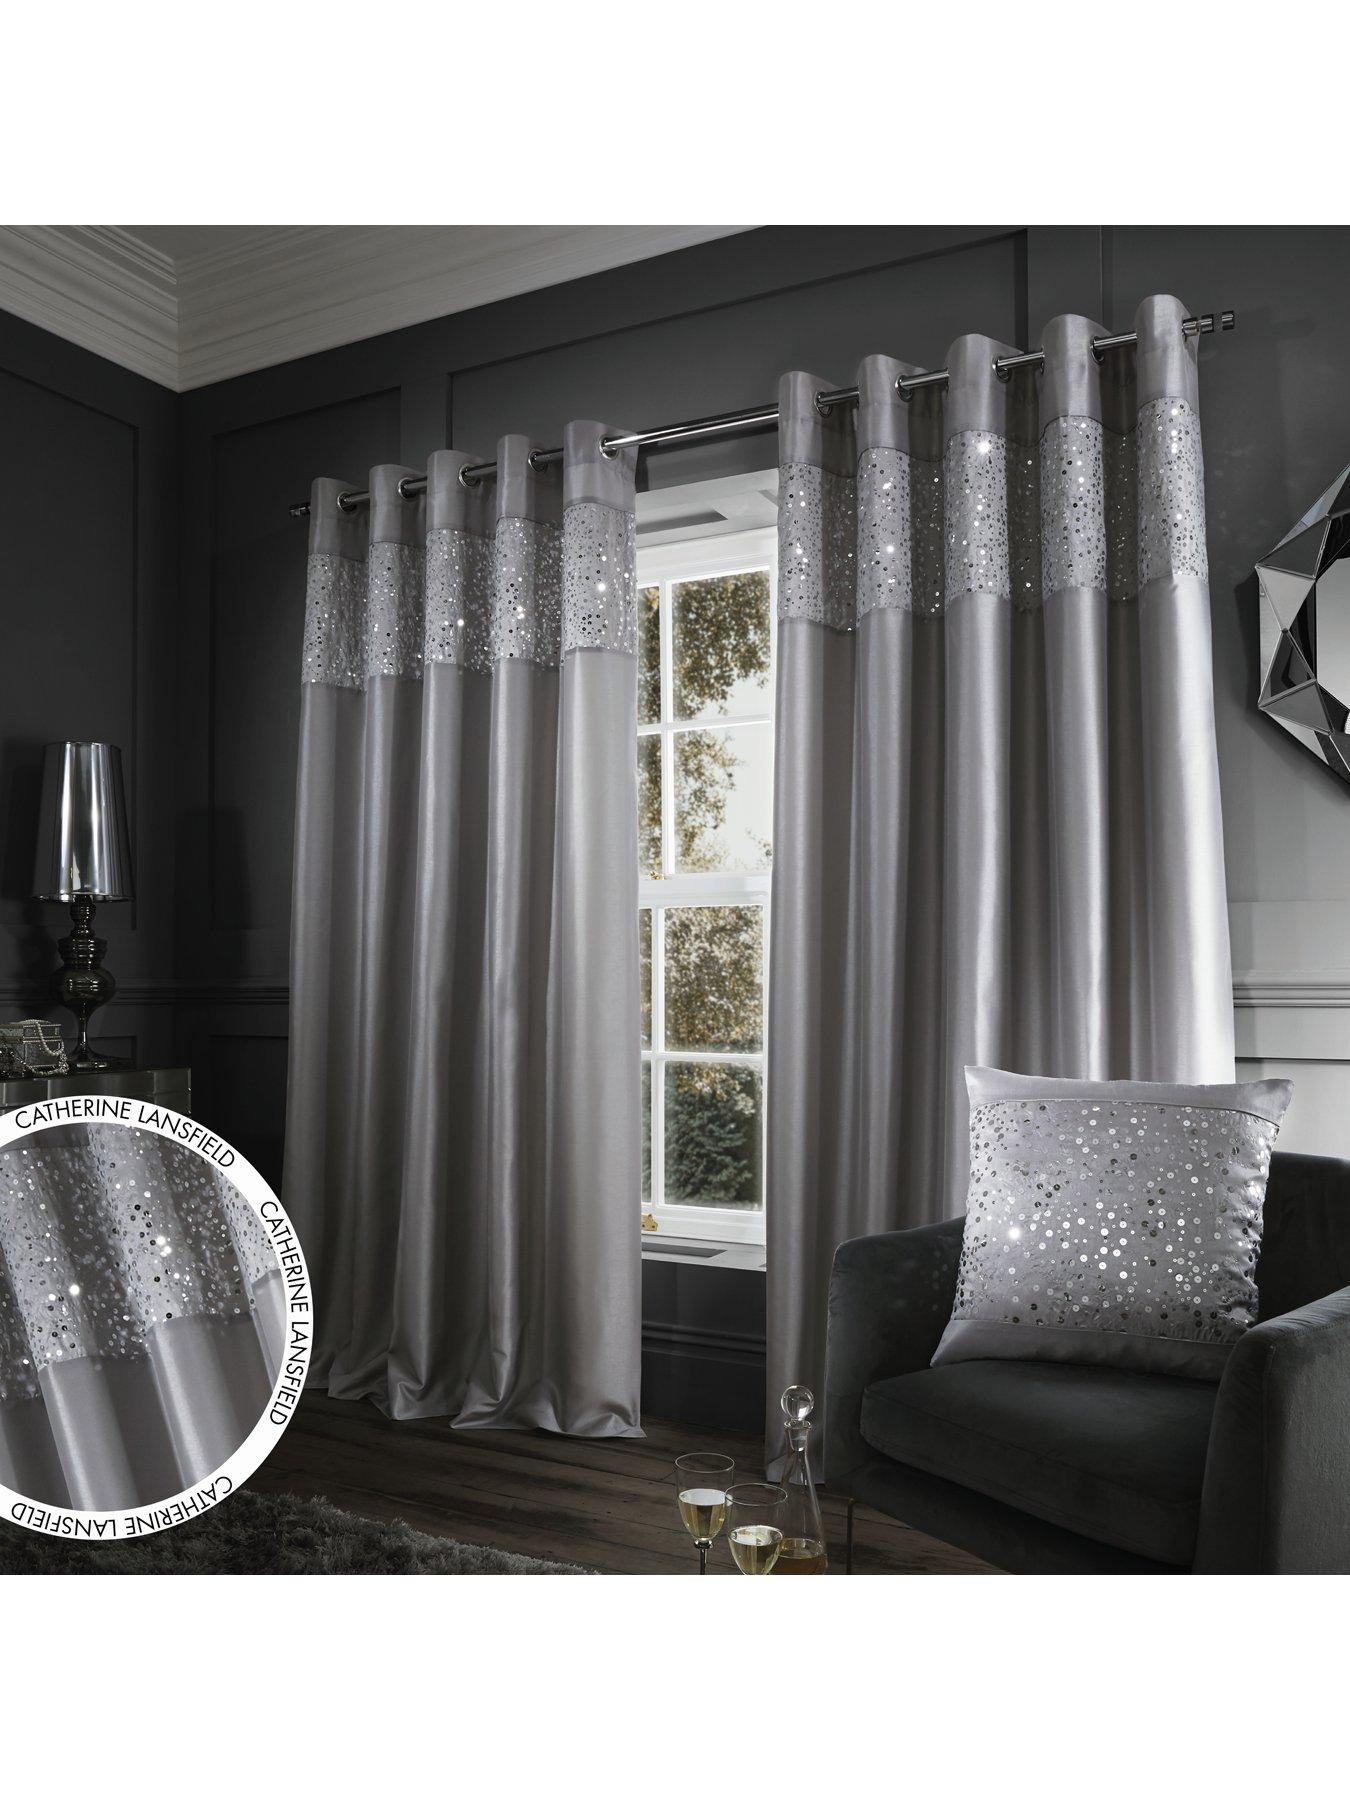 Catherine Lansfield Crushed Velvet Eyelet Lined Curtains